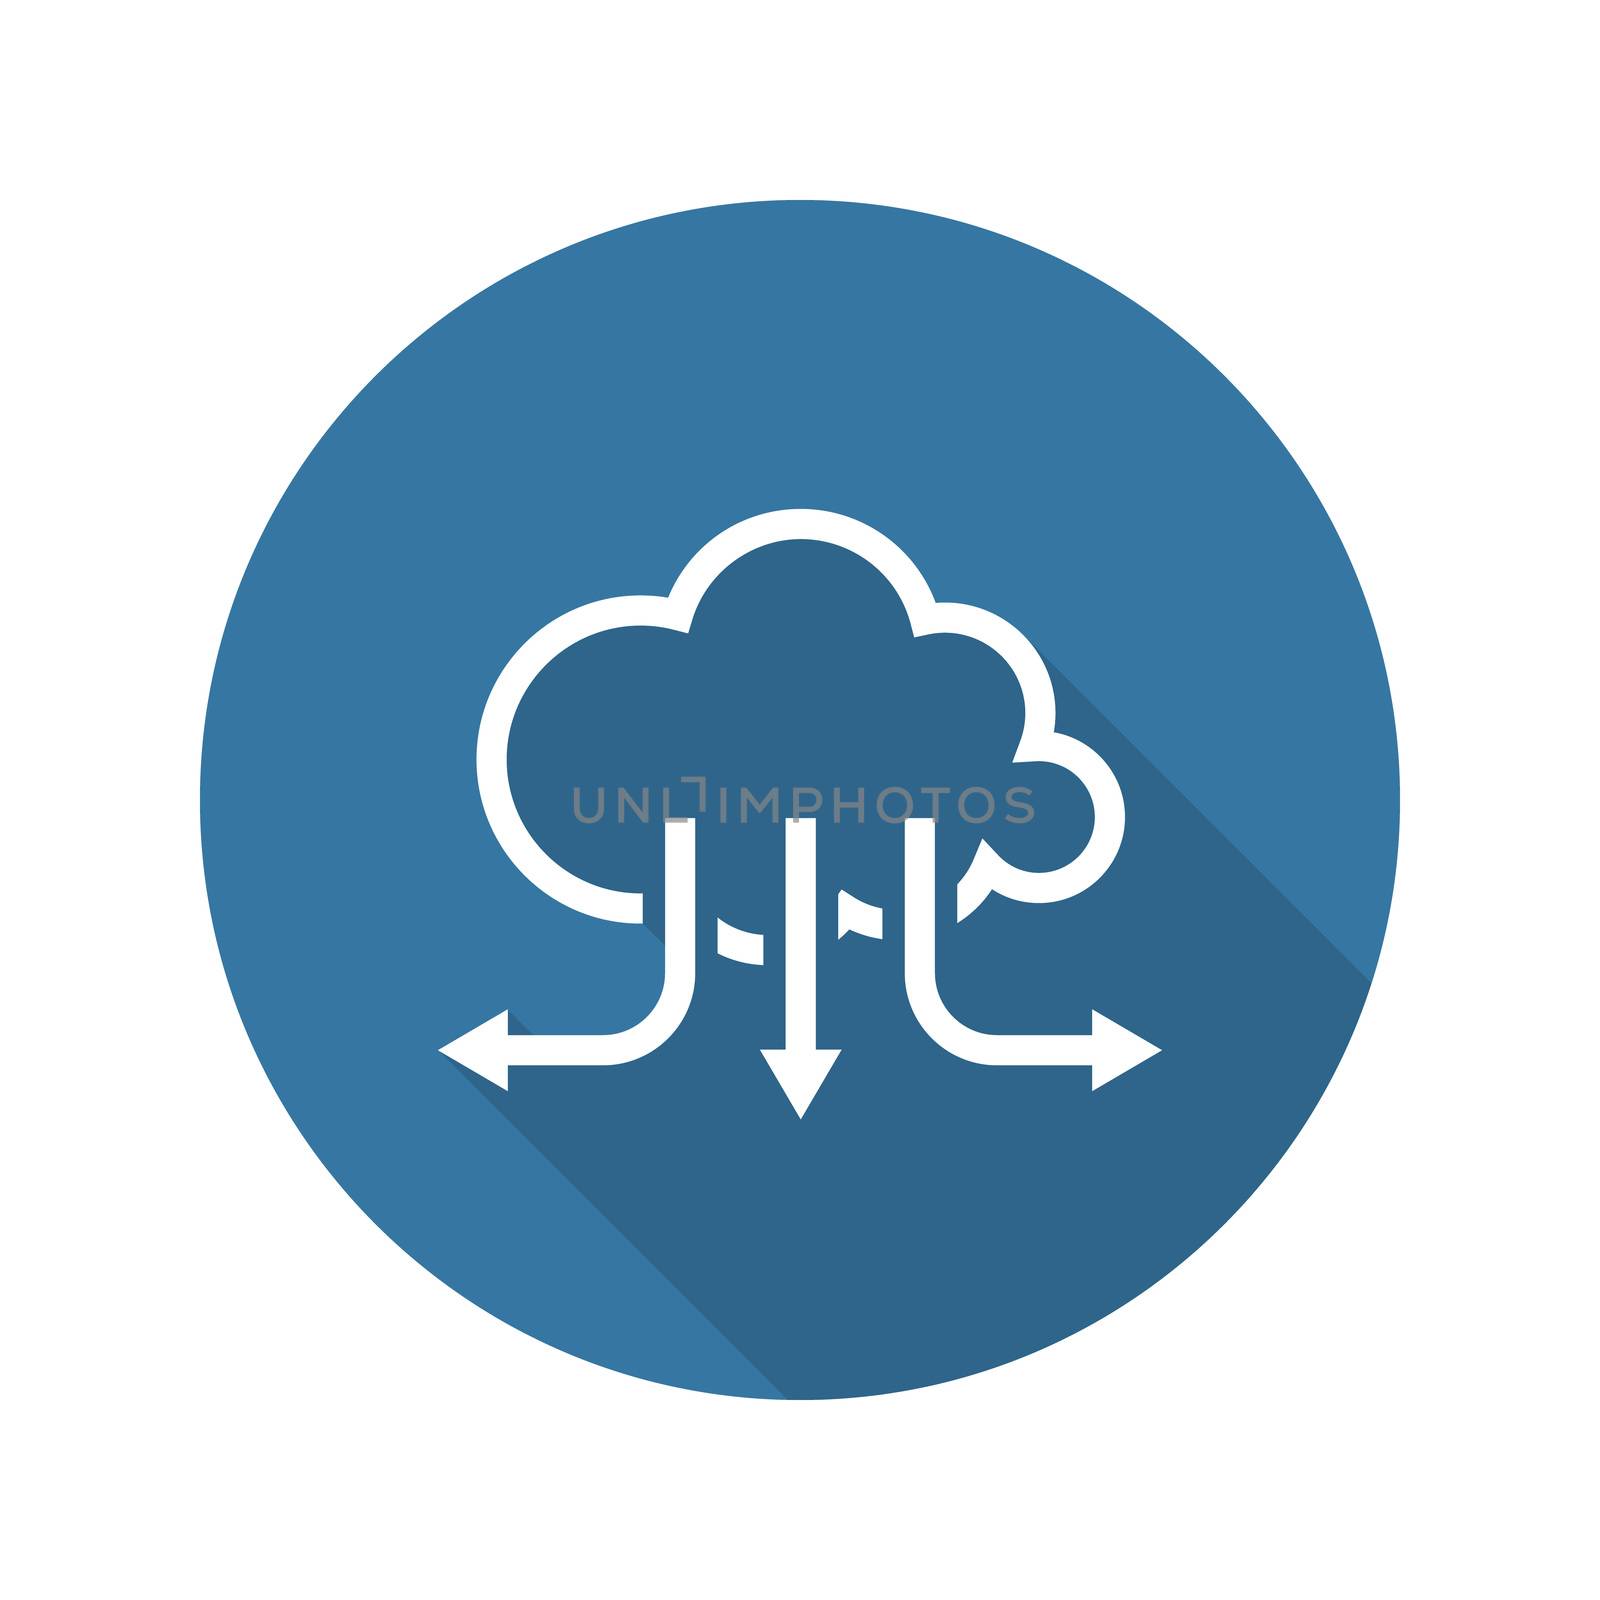 Accelerate Your Cloud Icon. Business Concept. Flat Design. Long  by WaD